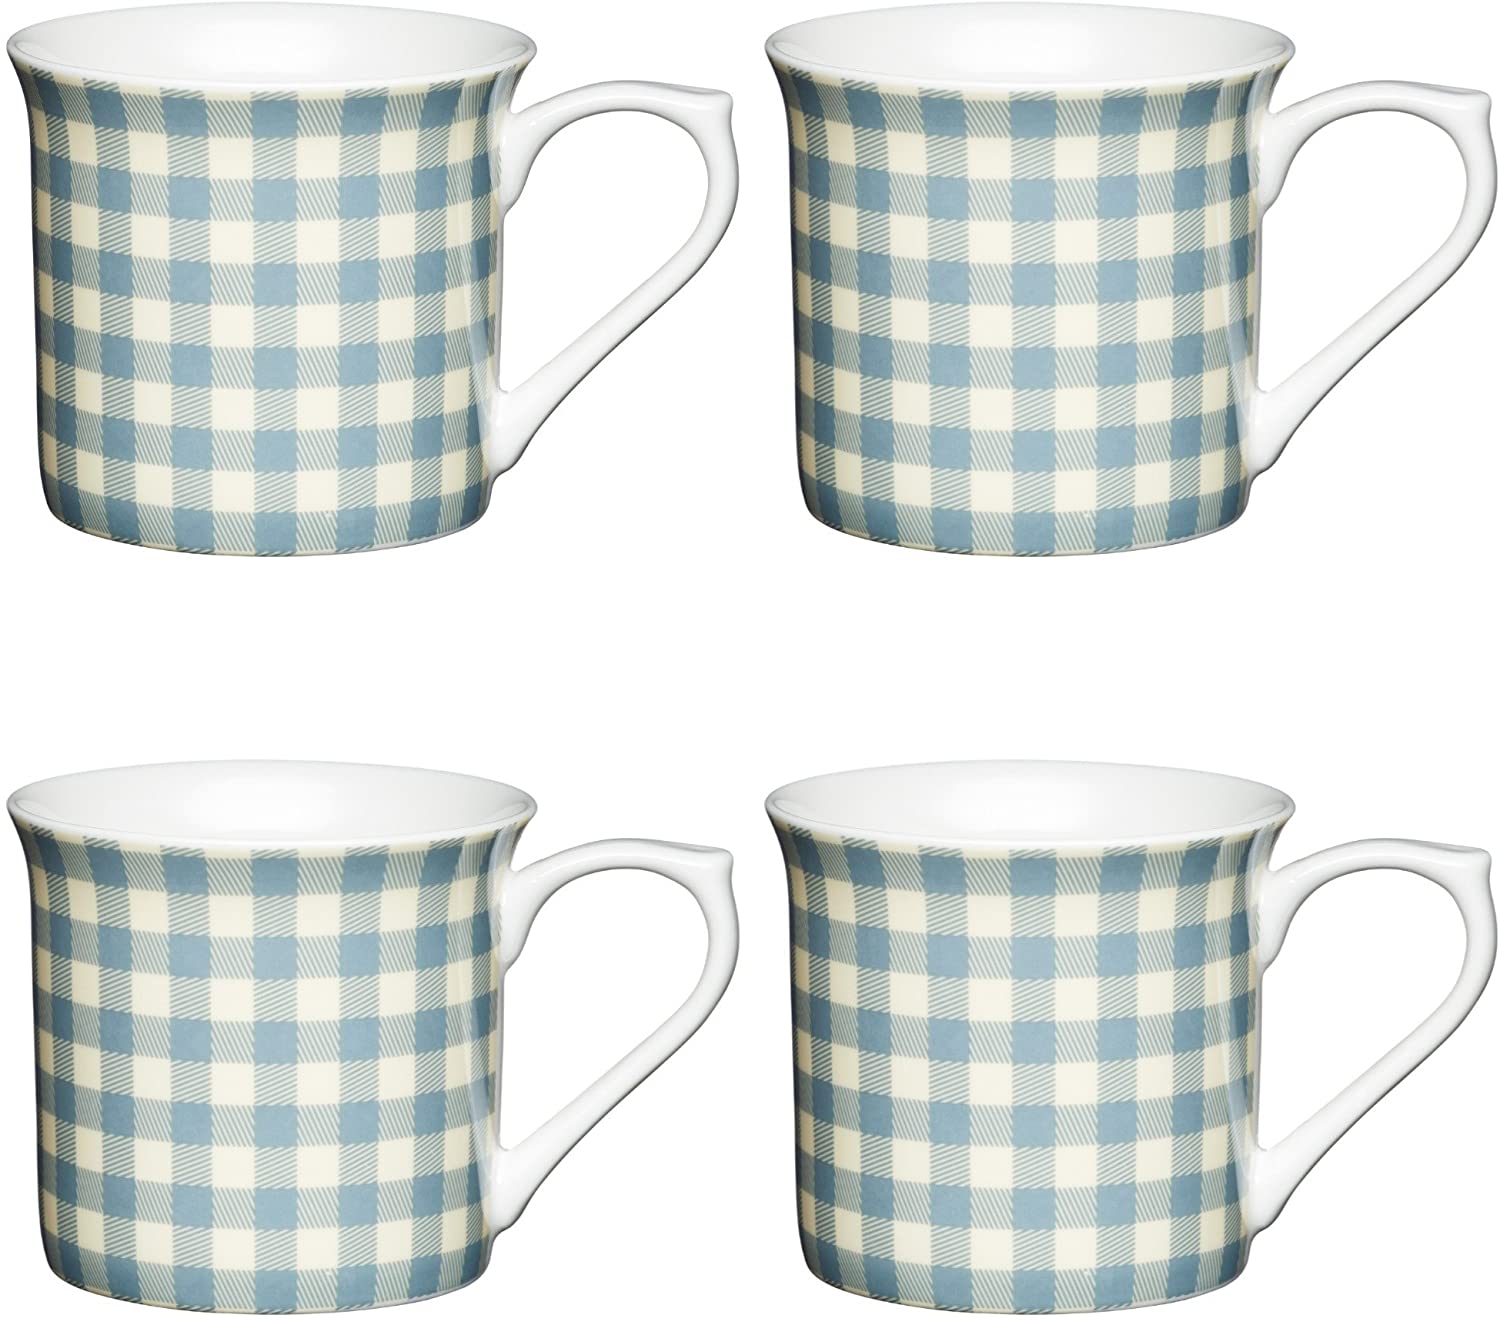 Kitchencraft Fine Gingham \'from Classic Pattern 300 ml Set of 4, Bone China Cups, Blue, 11.5 x 8.5 x 8 cm